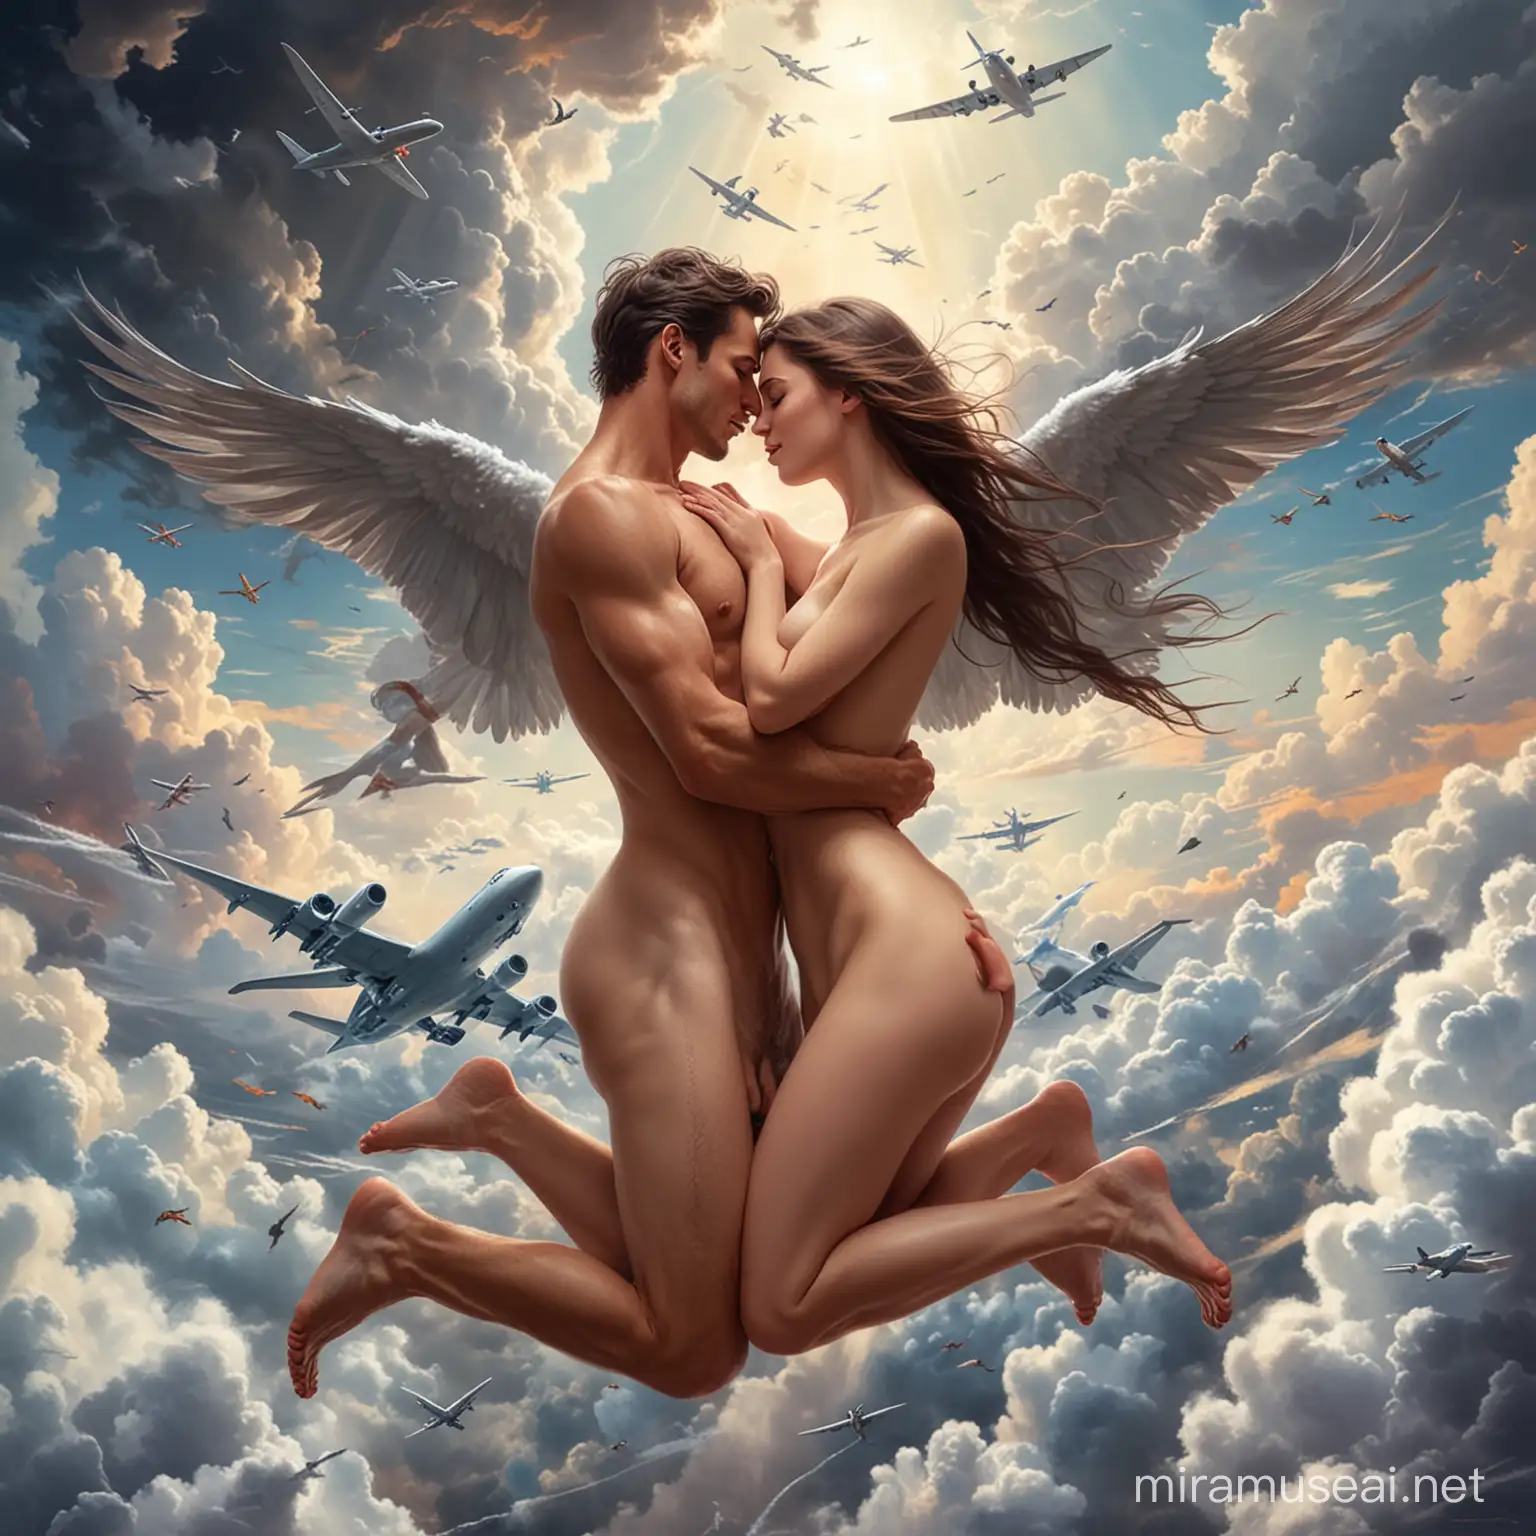 Passionate Naked Couple Making Love in Clouds with Airplanes and Birds